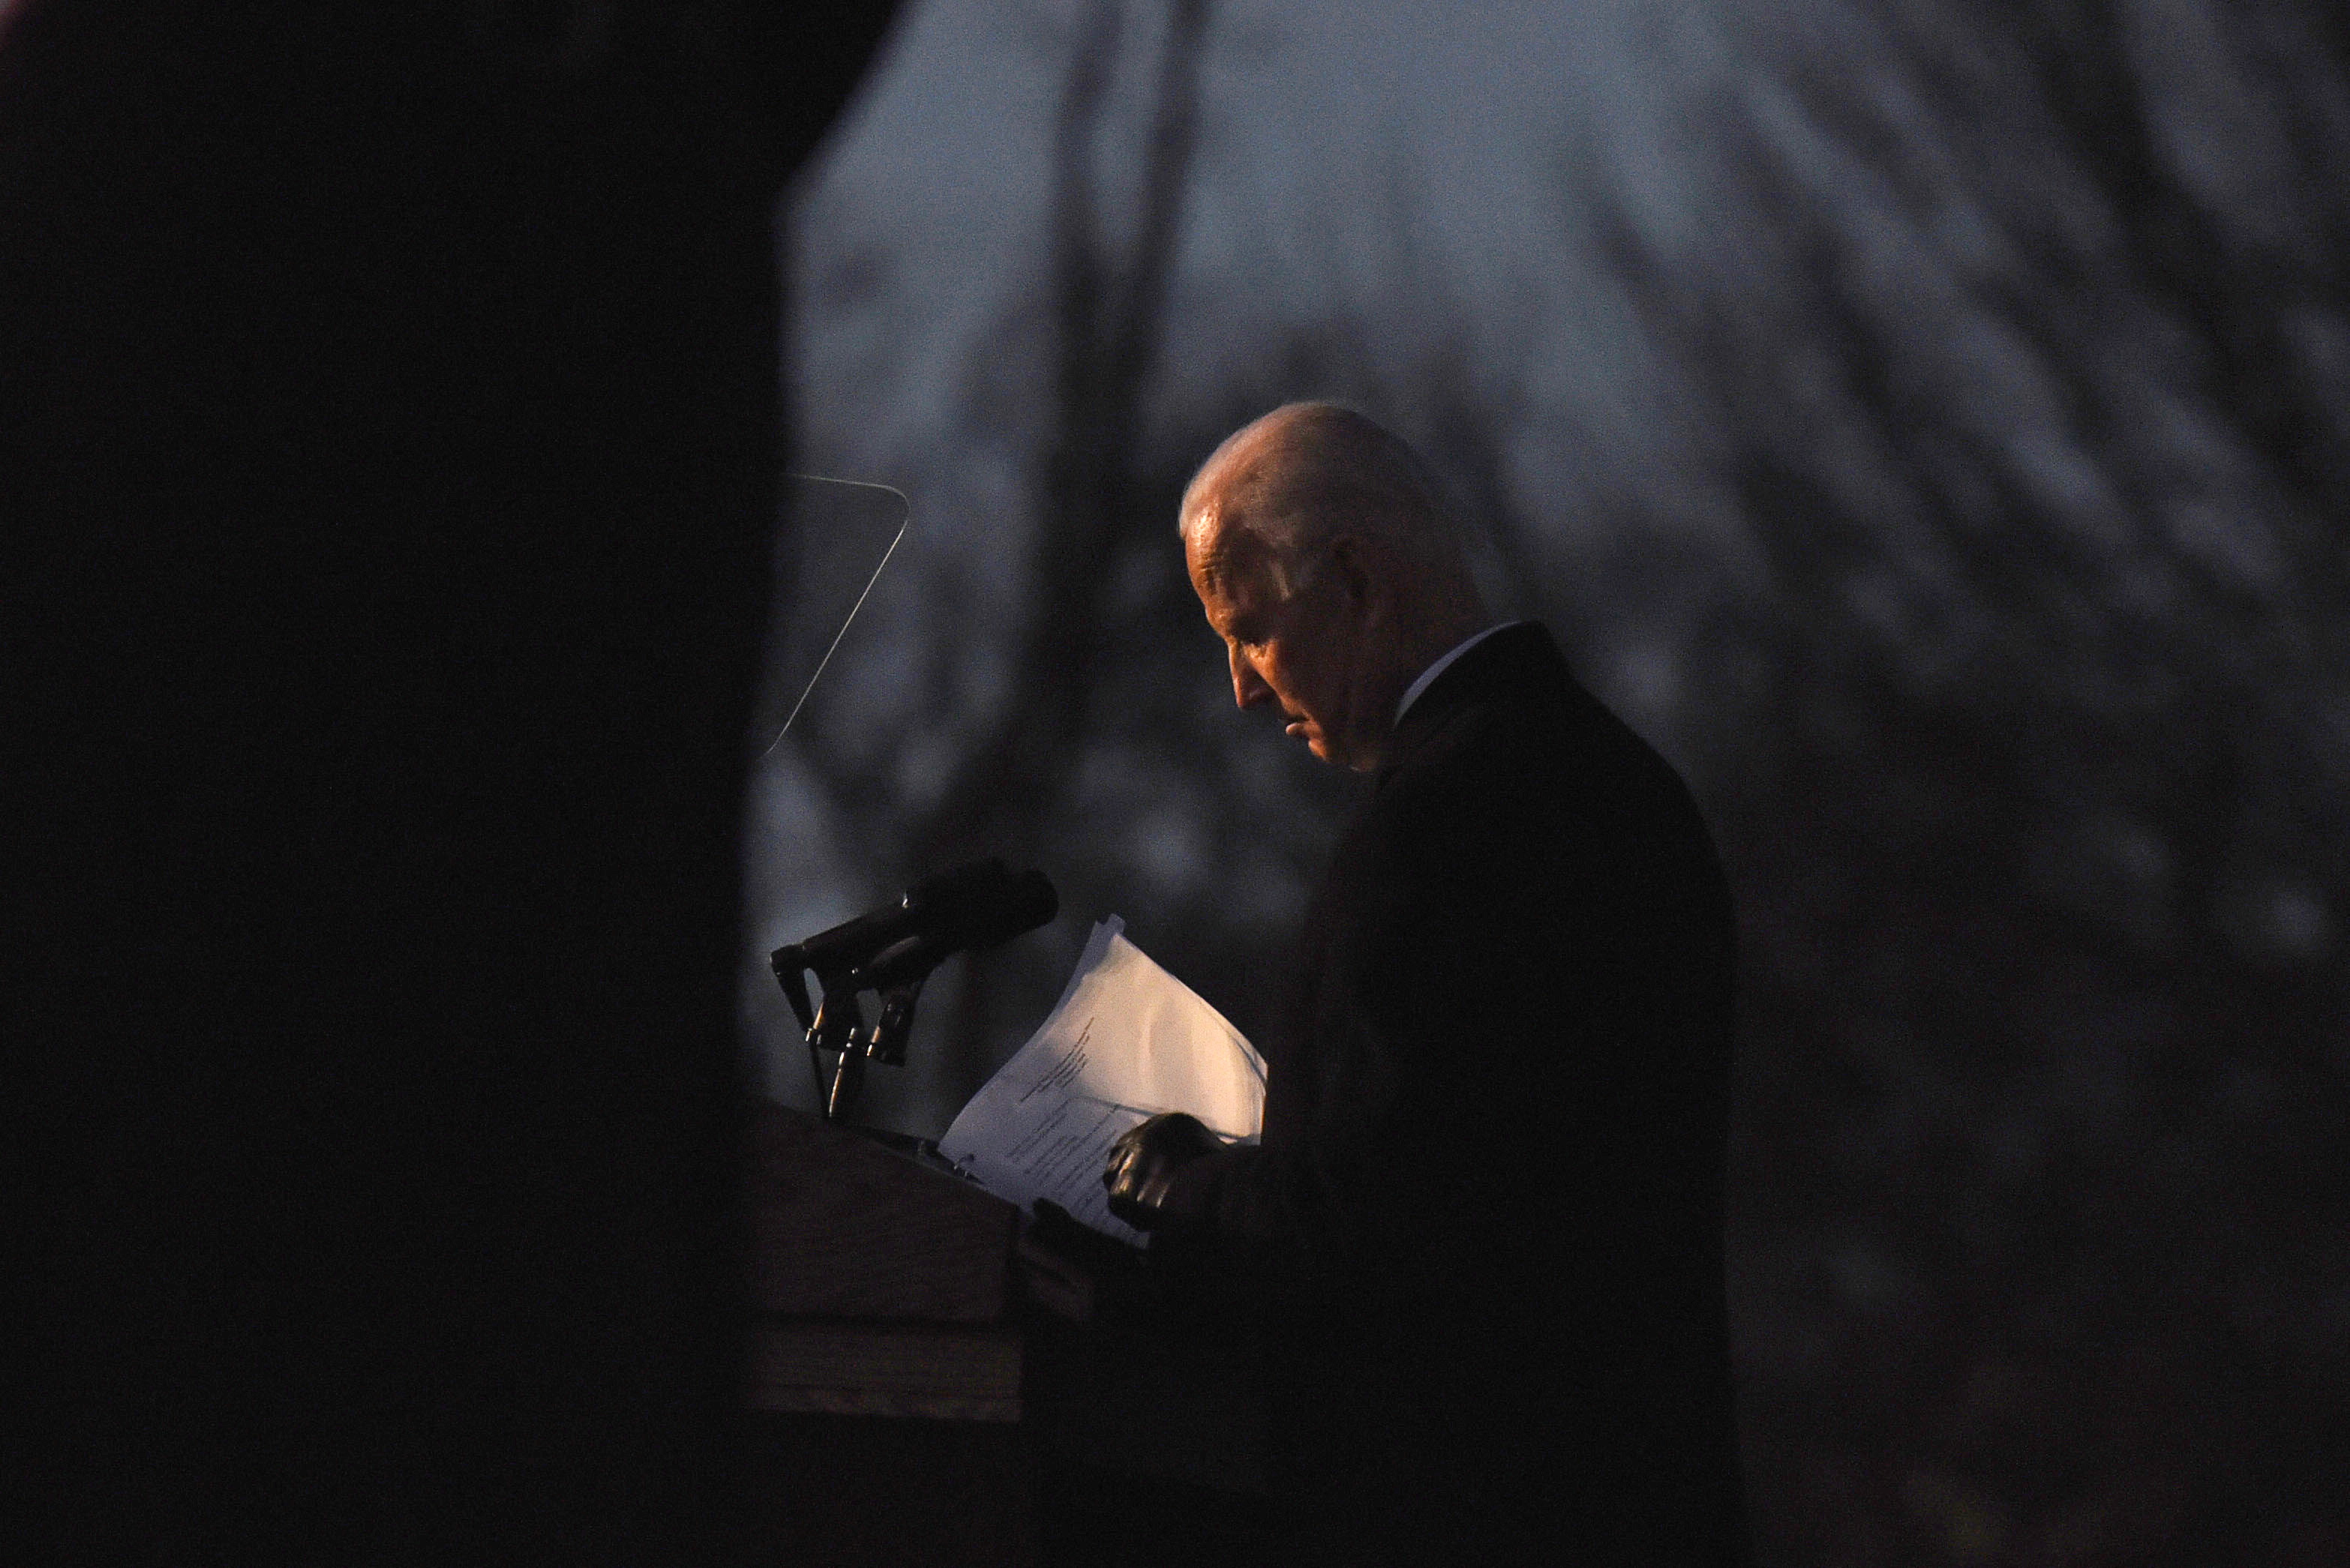 Joe Biden hosts a memorial to honor those who died from COVID-19